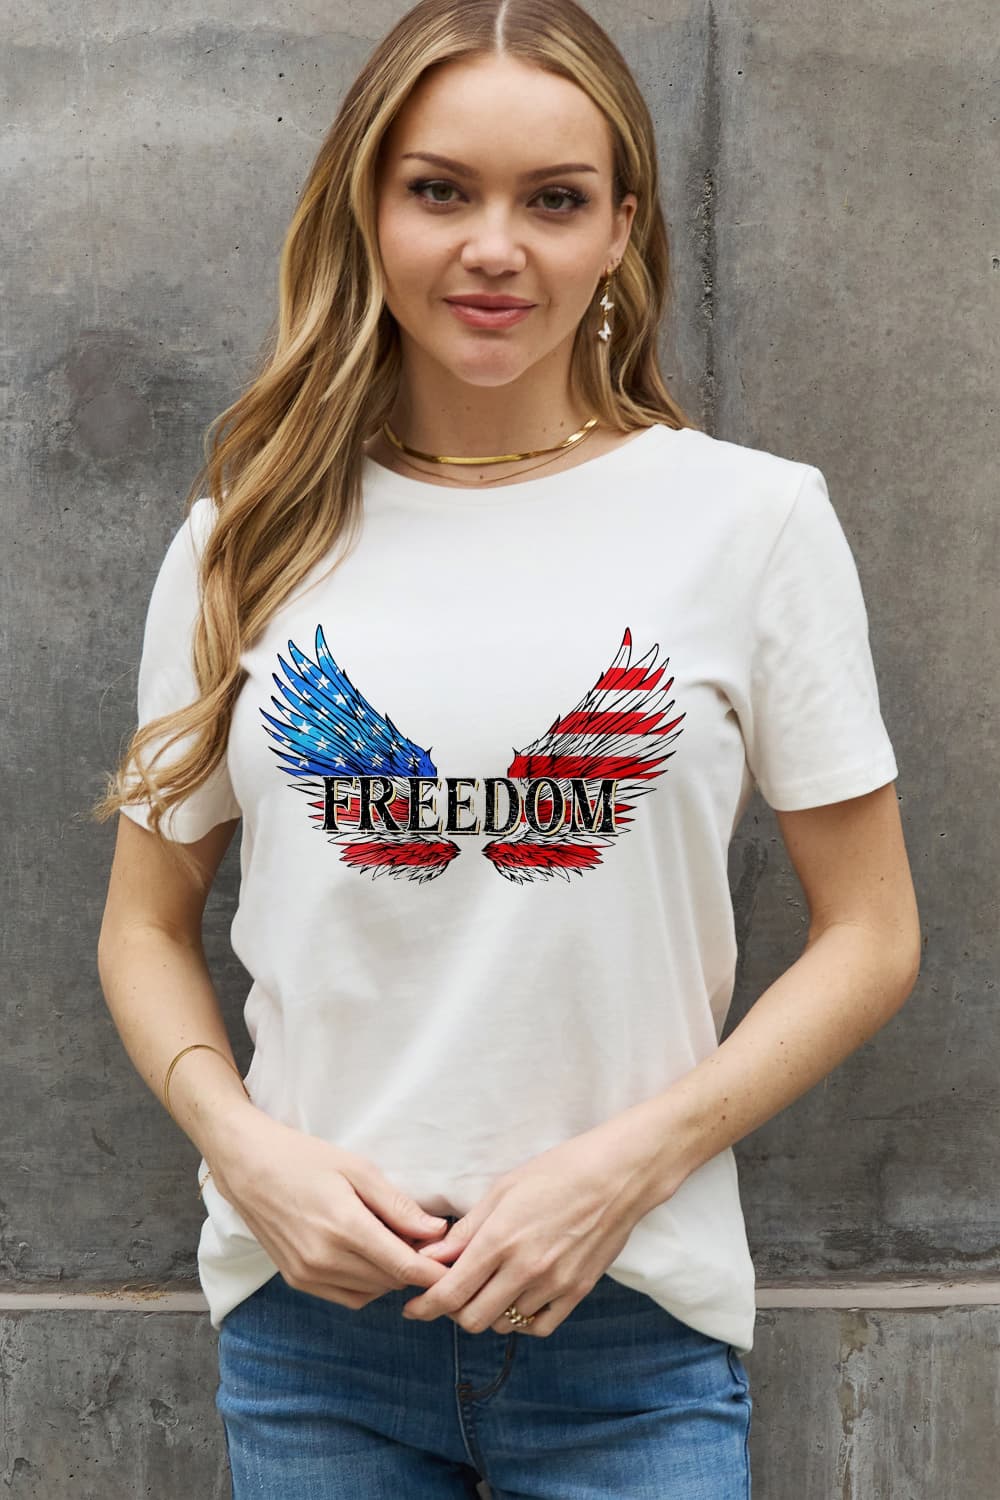 Simply Love Full Size FREEDOM Wing Graphic Cotton Tee